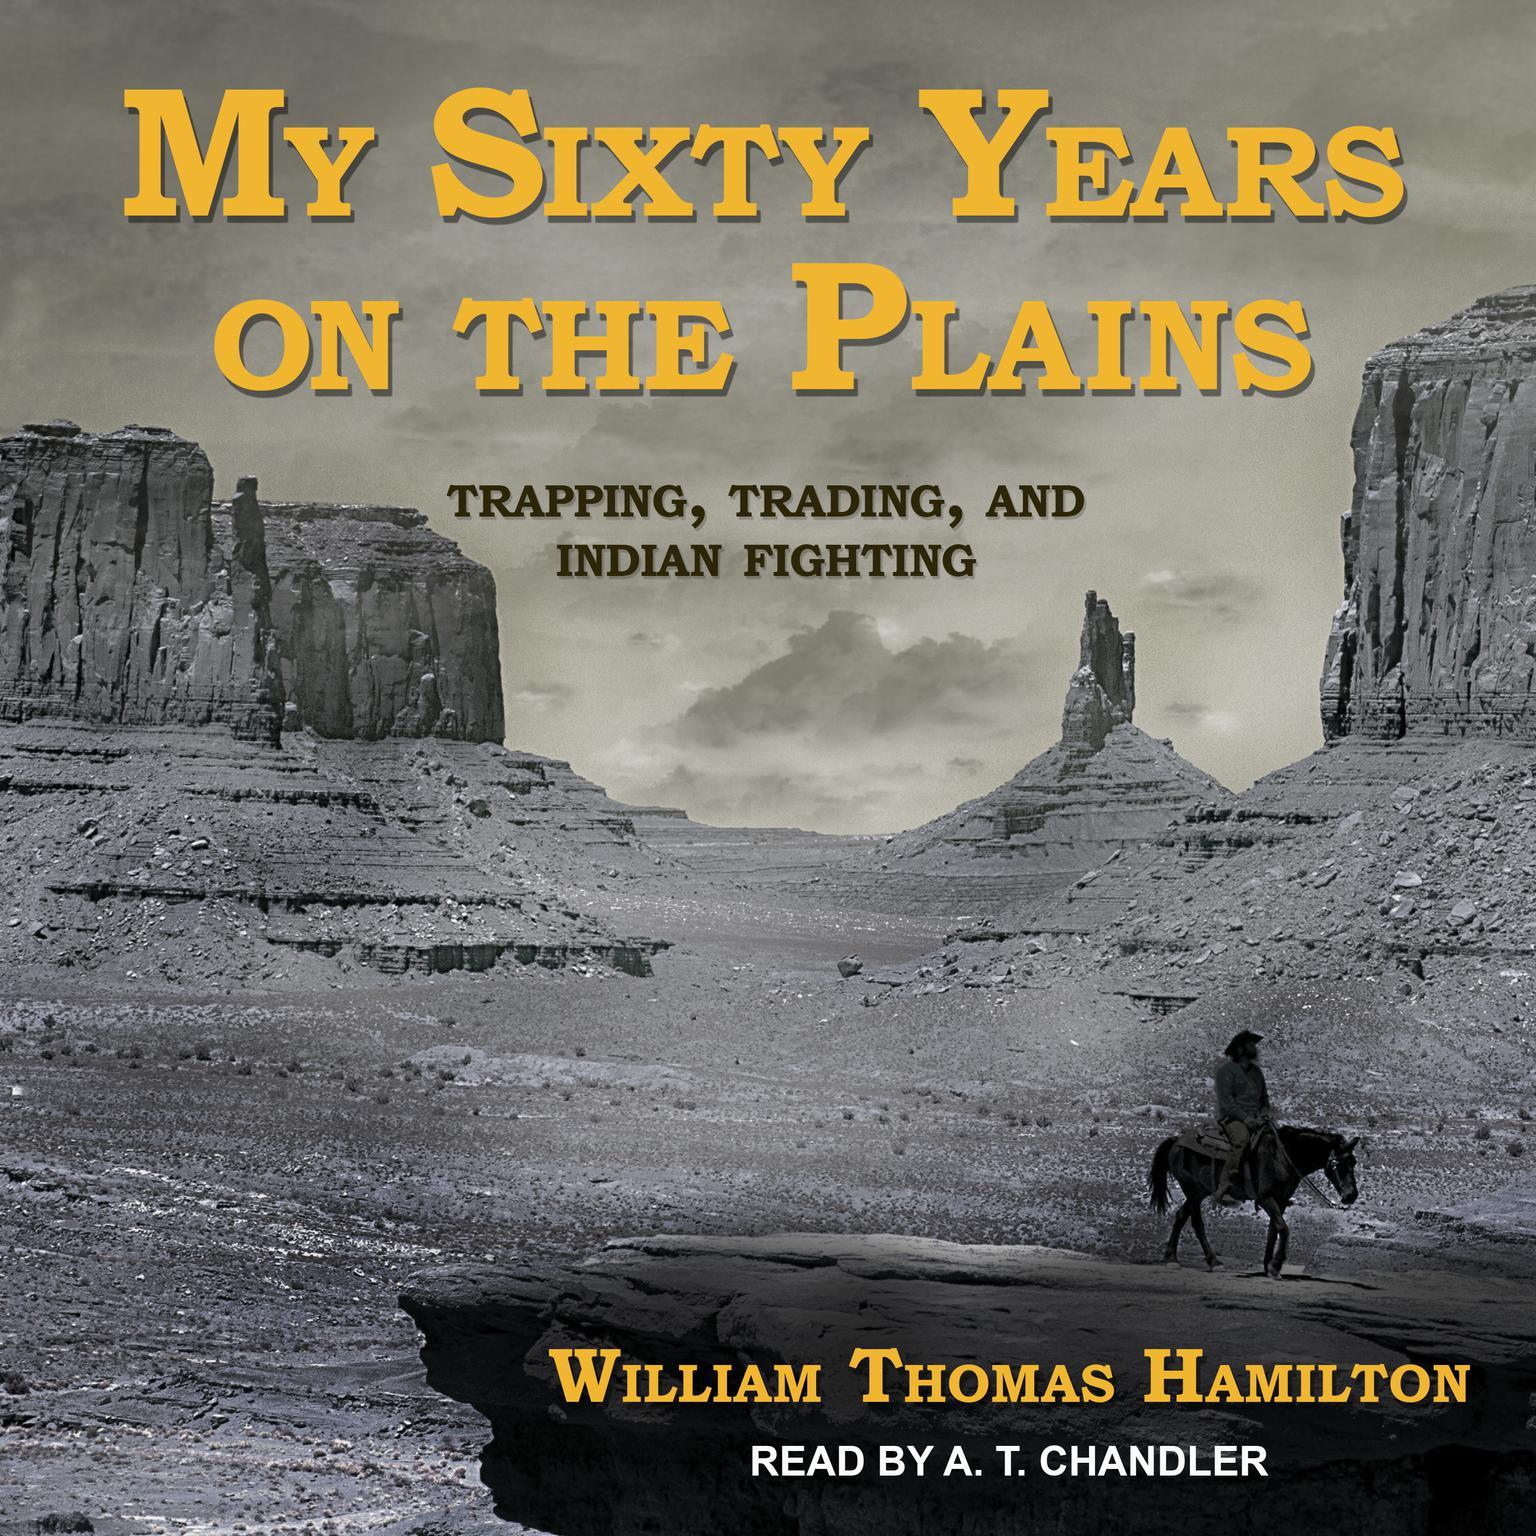 My Sixty Years on the Plains: Trapping, Trading, and Indian Fighting Audiobook, by William Thomas Hamilton